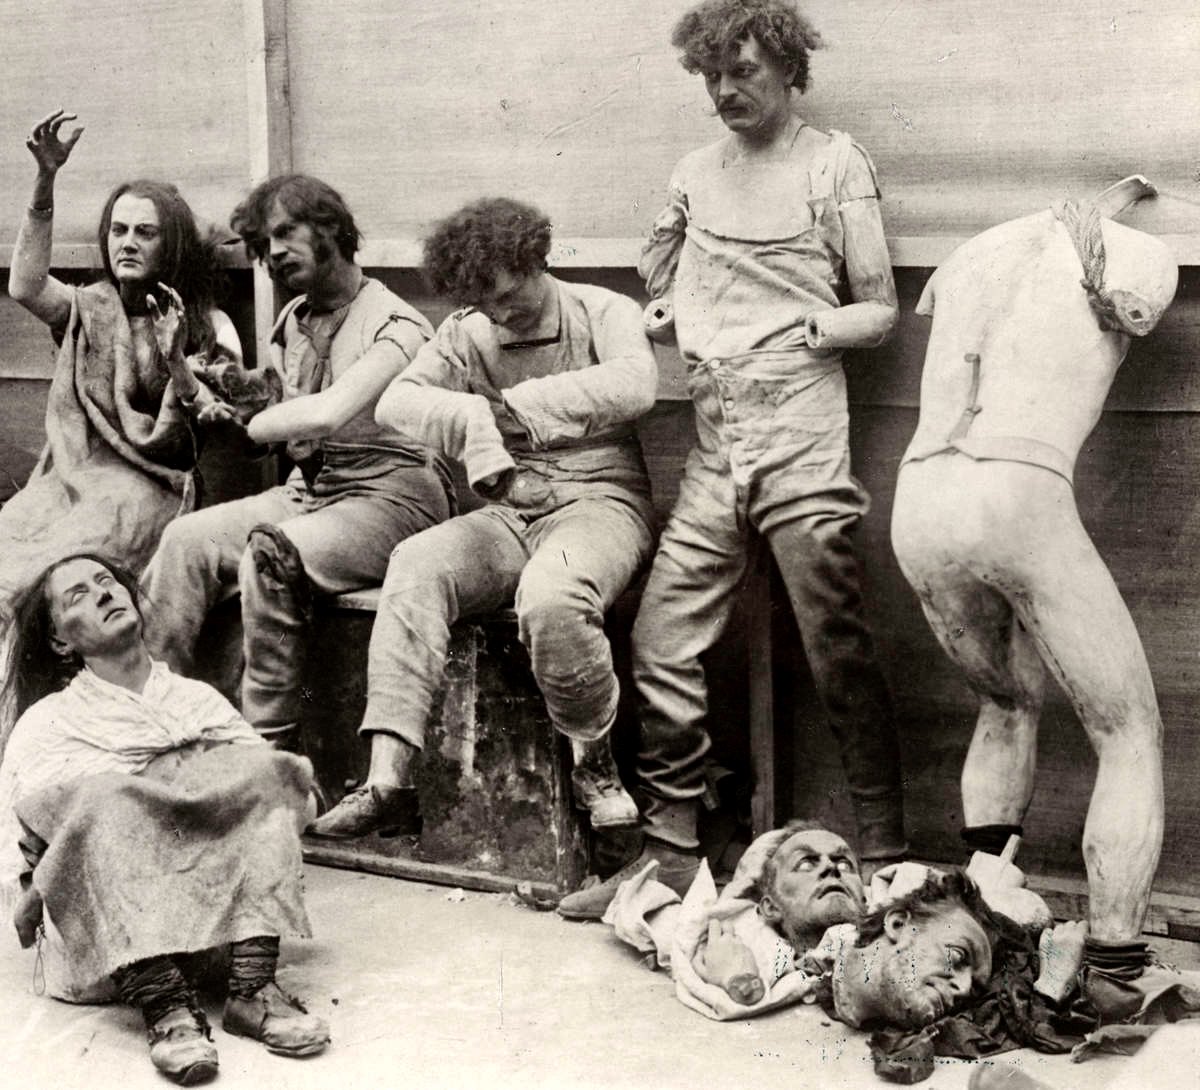 RT @ThanatosArchive: Melted and Damaged Mannequins After a Fire at Madam Tussaud’s Wax Museum in London, 1925 https://t.co/EdinddGZ6c